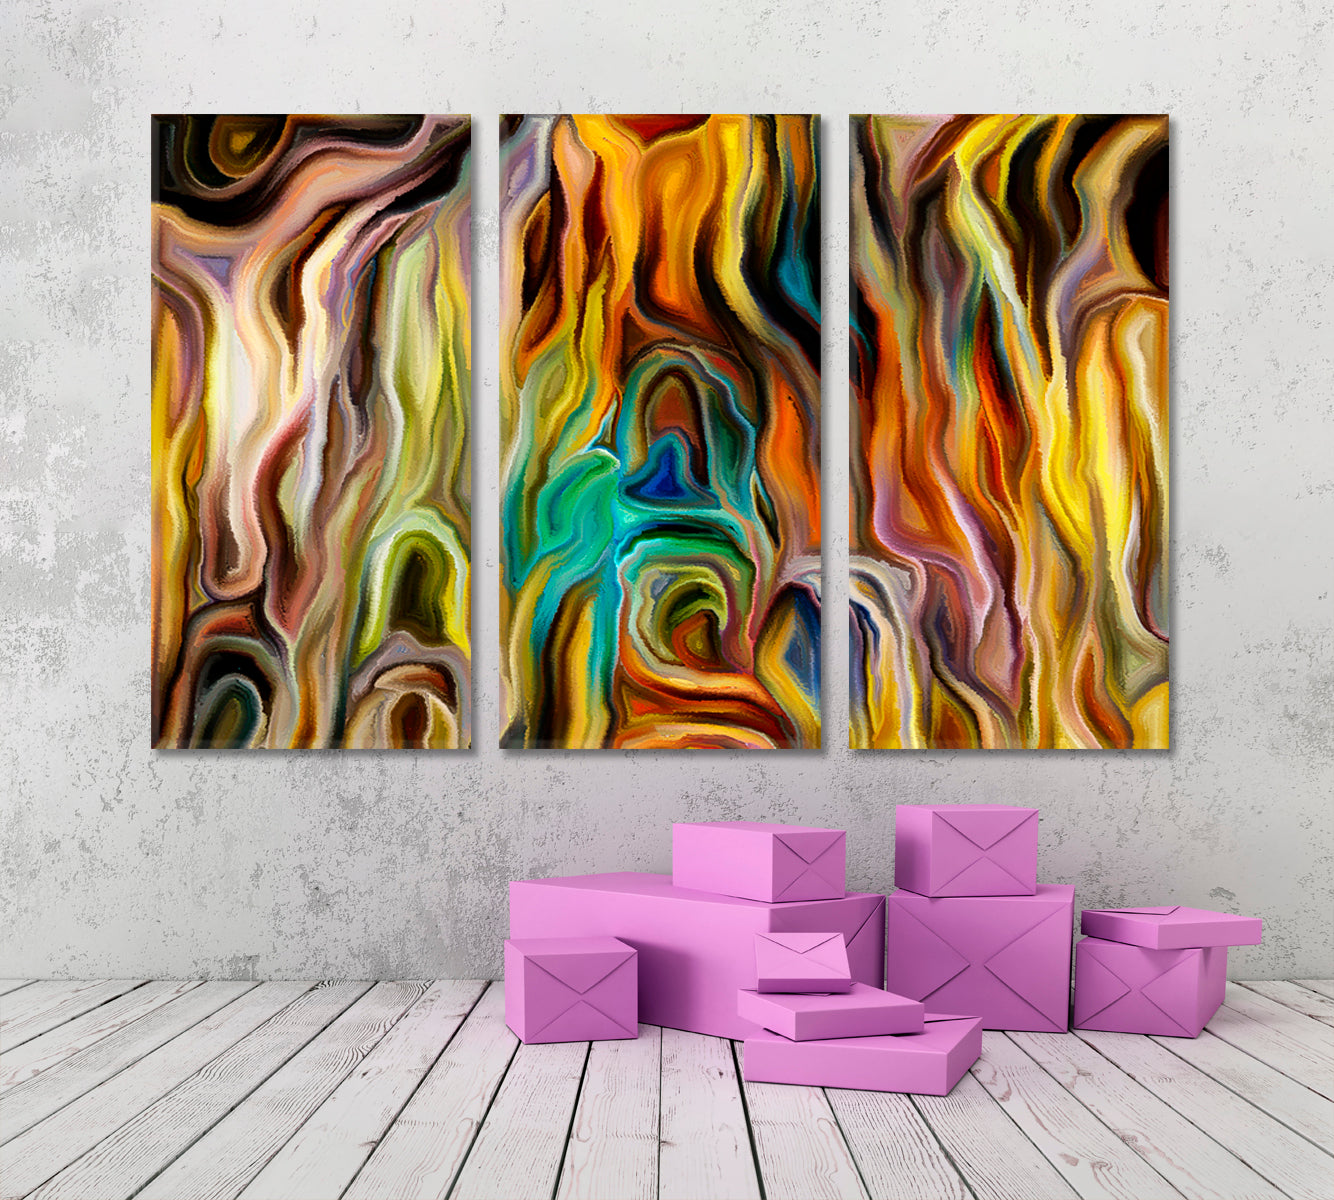 COLORED FLAME LINES Abstract Contemporary Art Contemporary Art Artesty 3 panels 36" x 24" 